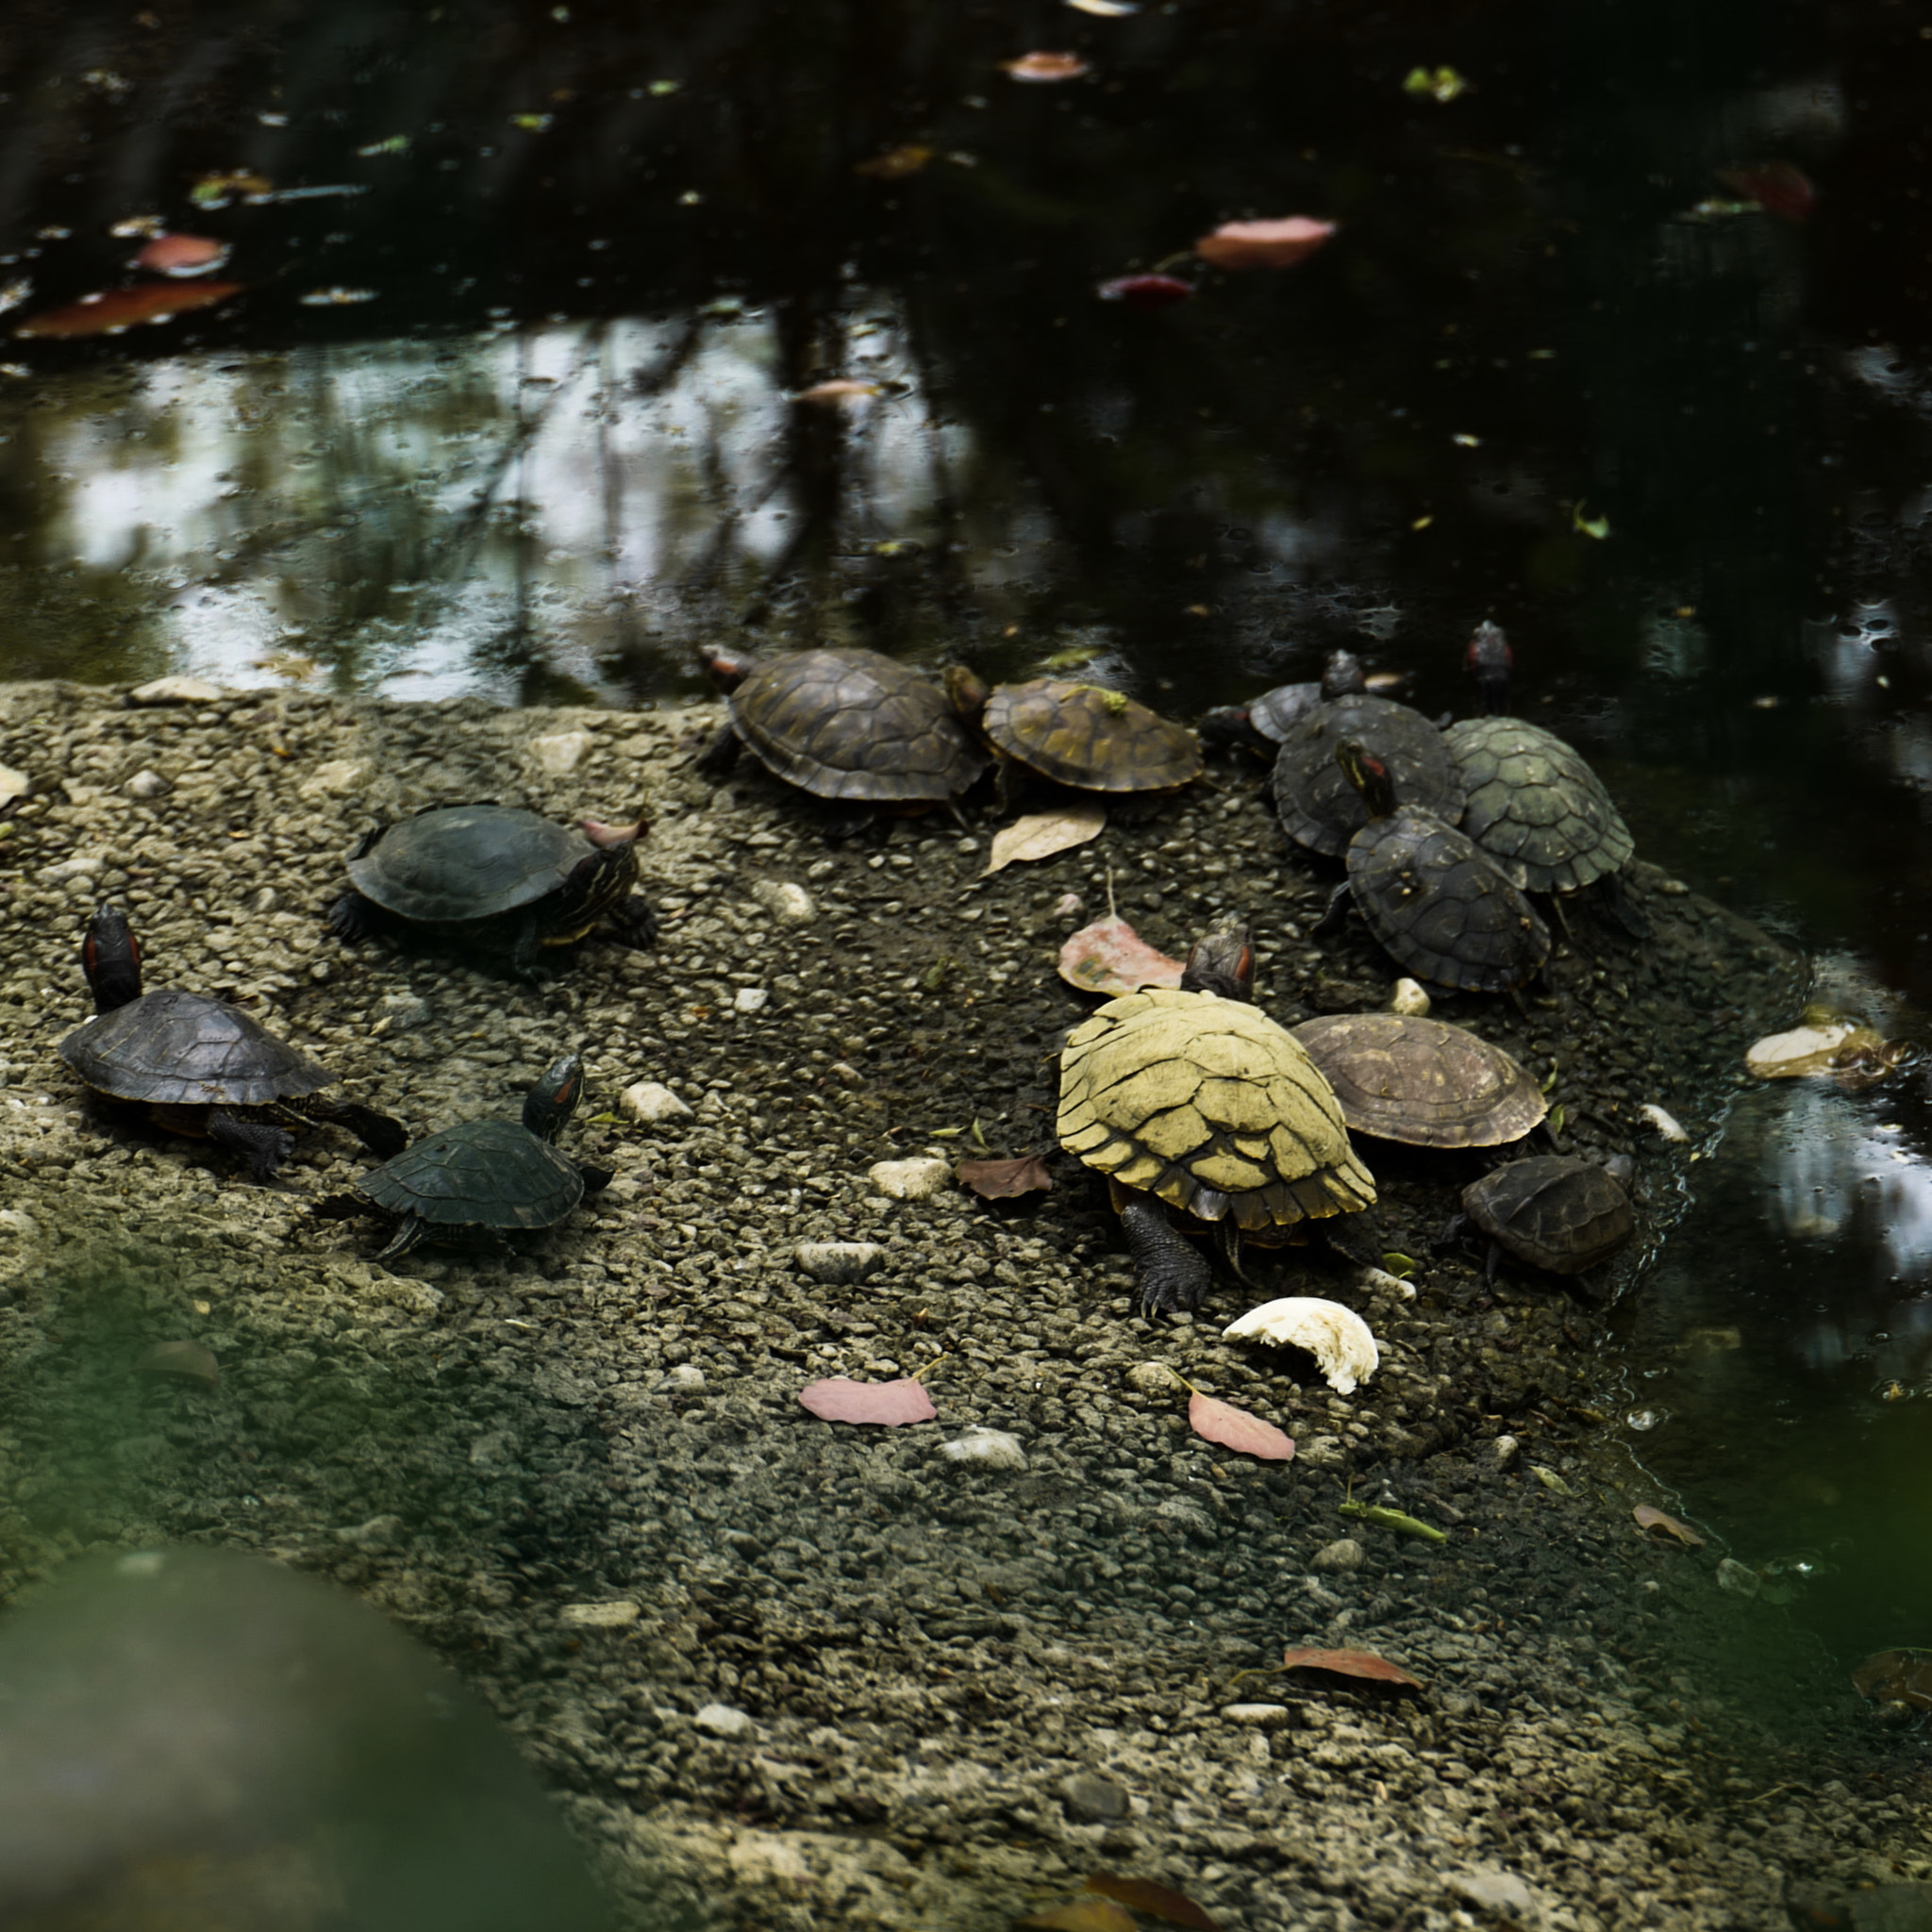 VARIO-ELMARIT 1:2.8-4.0/24-90mm ASPH. OIS sample photo. The basking turtles in temple photography